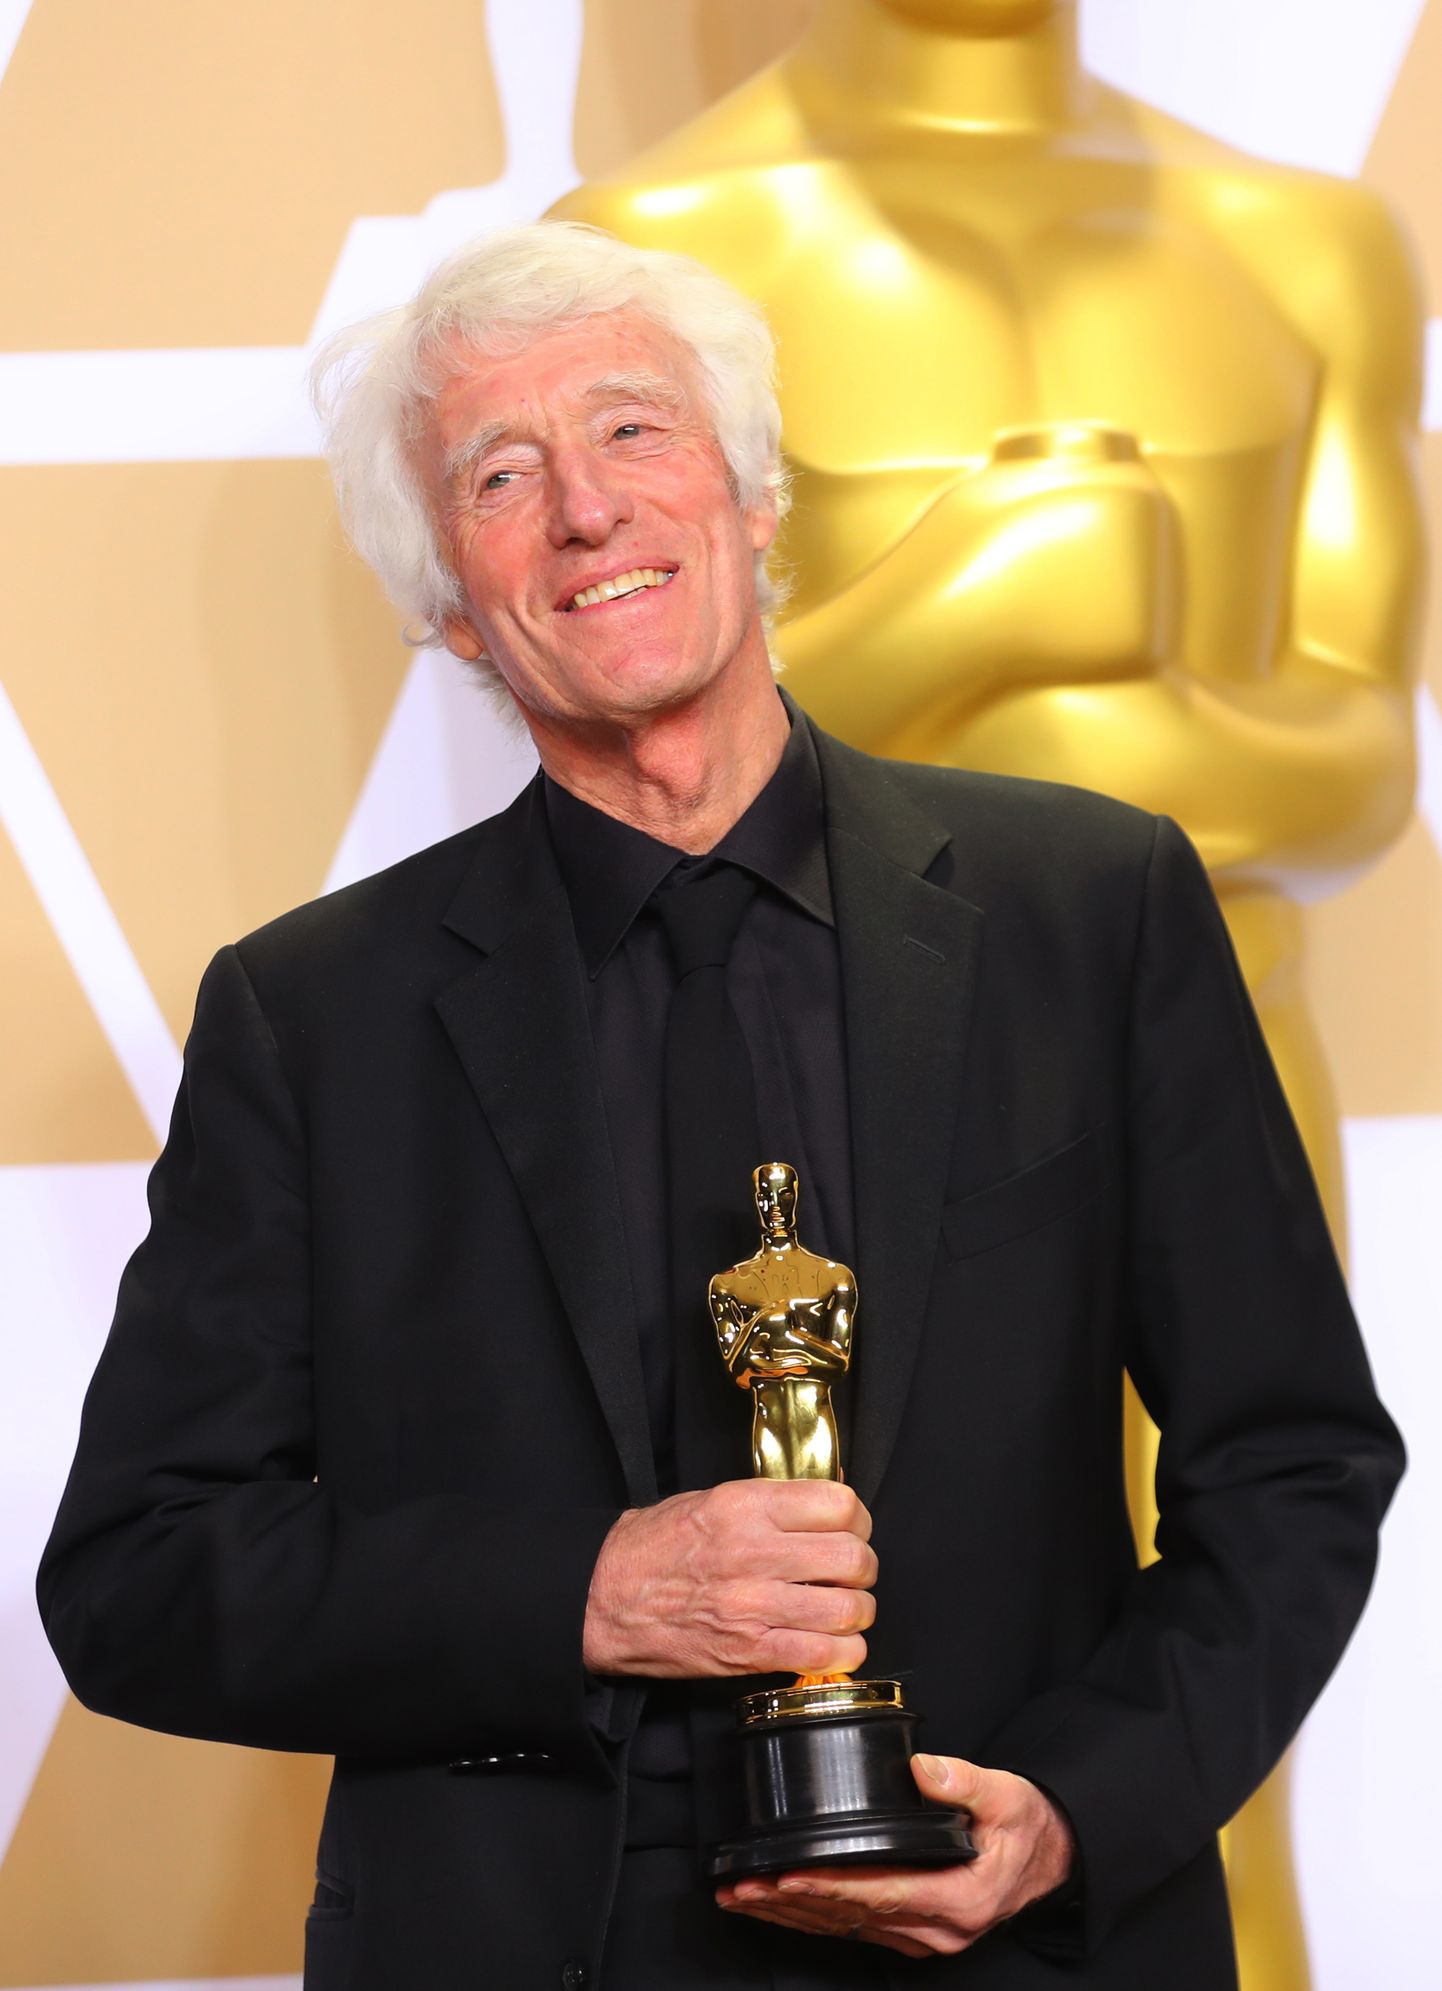 90th Academy Awards - Oscars Backstage - Hollywood, California, U.S., 04/03/2018 - Roger A. Deakins holds the Oscar for Best Cinematography for "Blade Runner 2049." REUTERS/Mike Blake